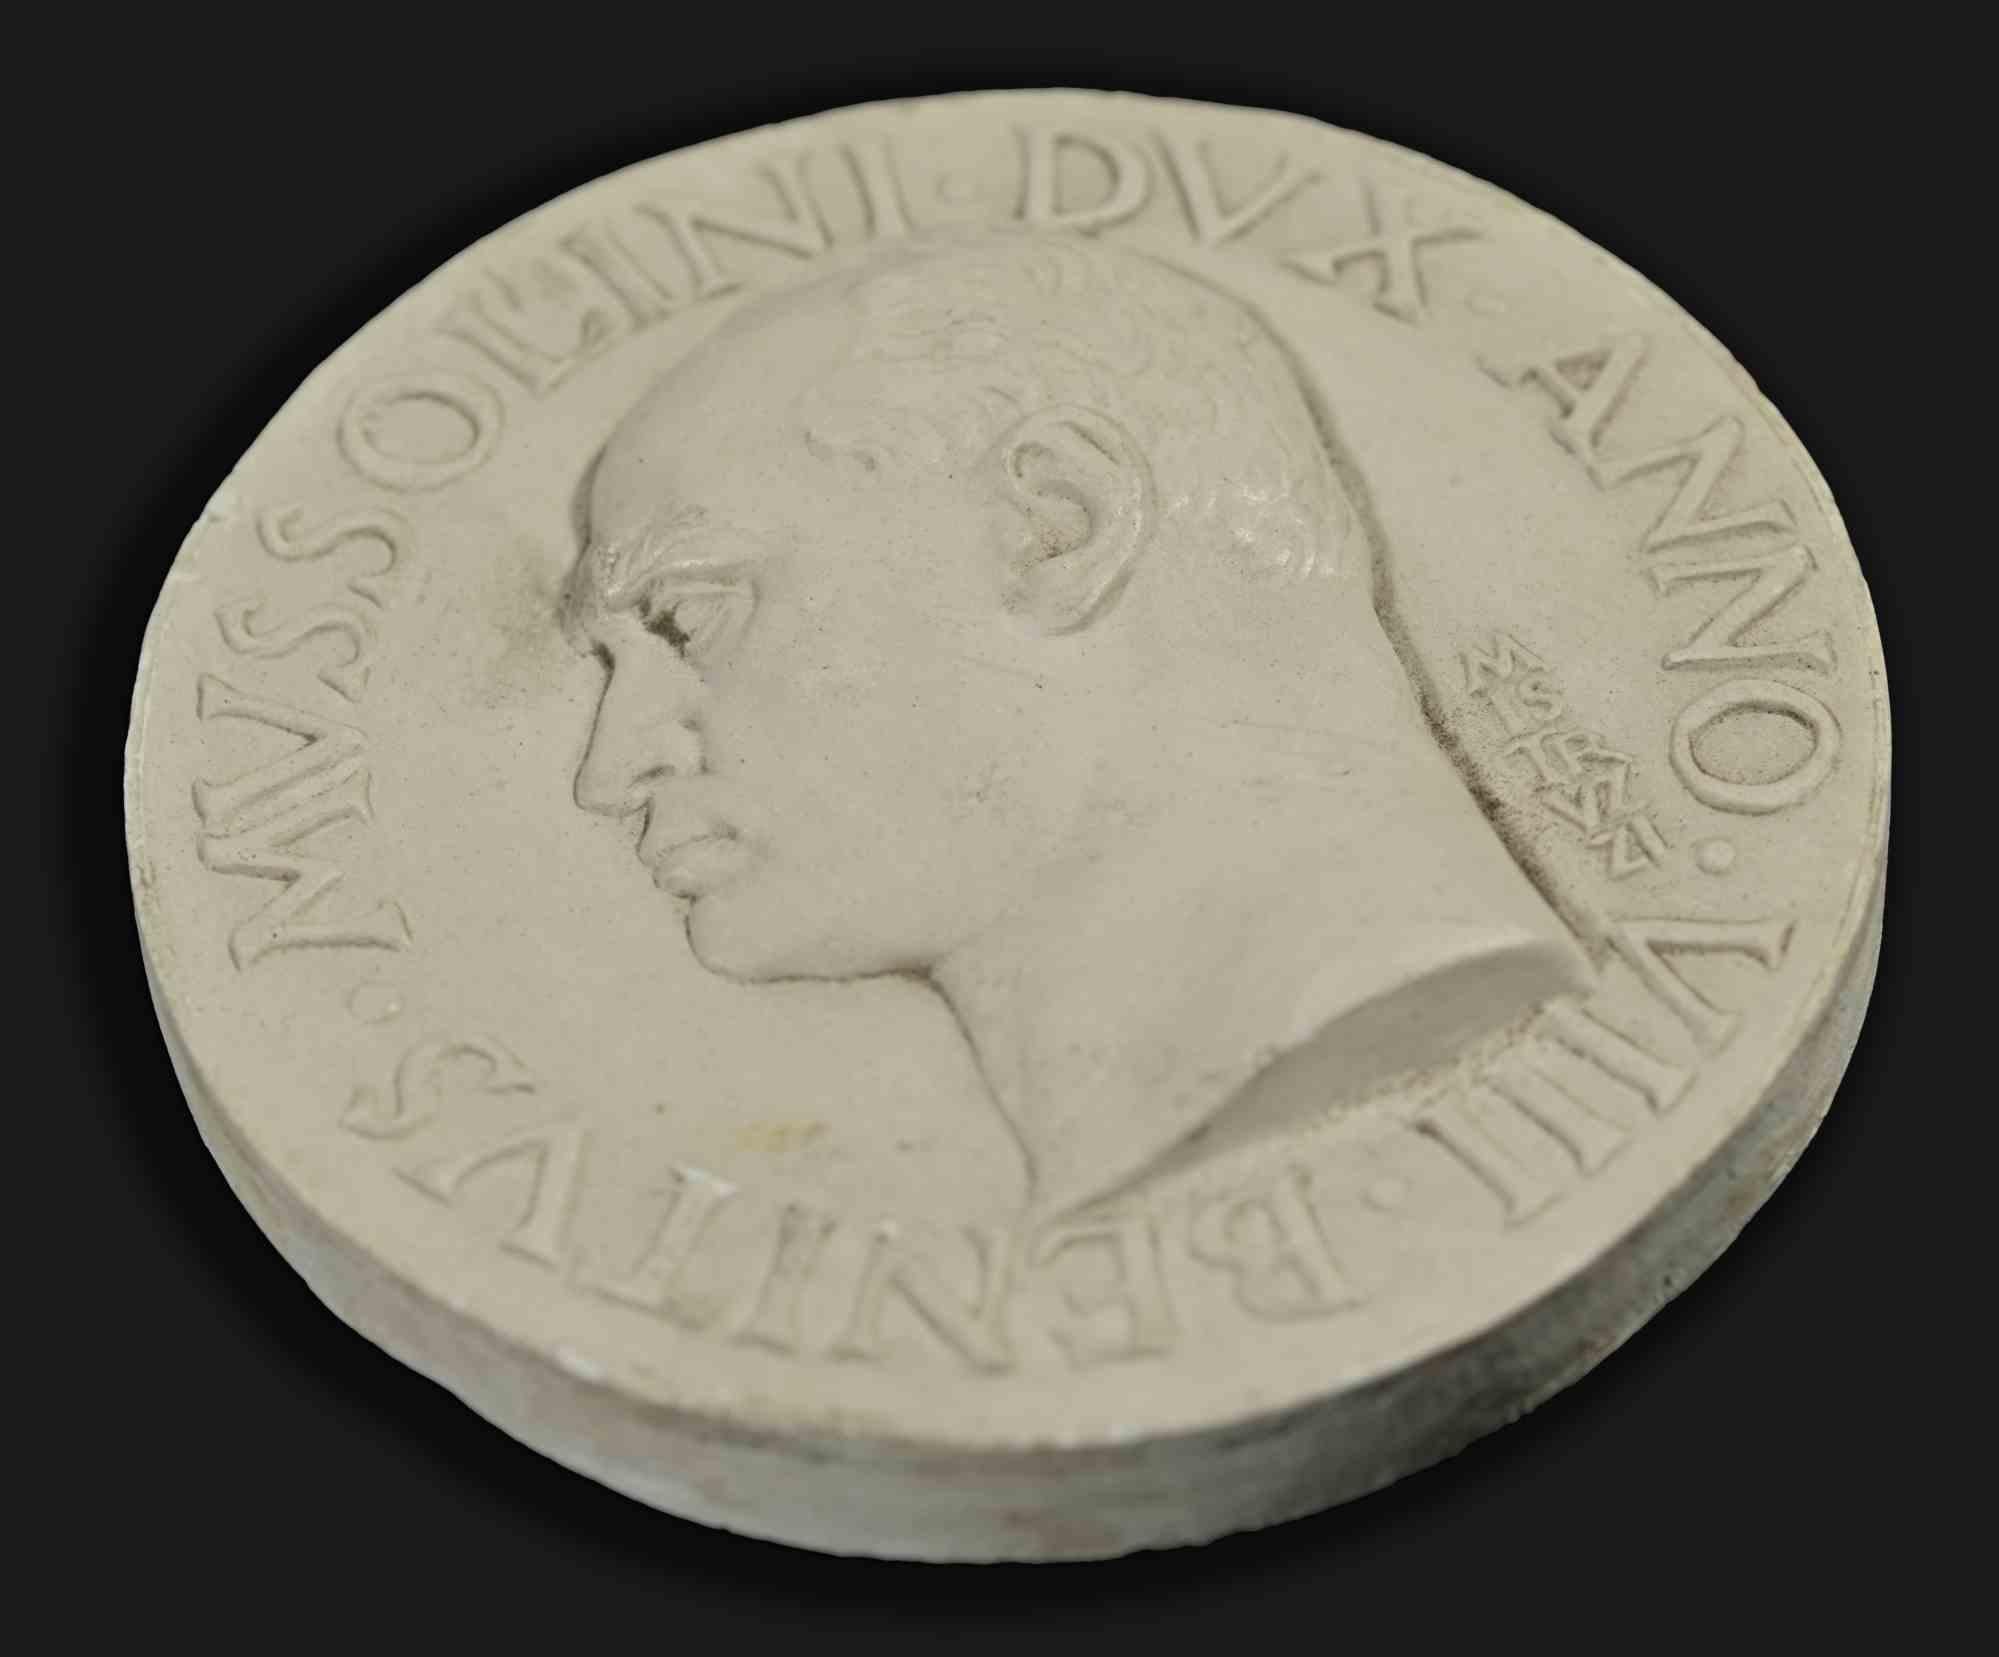 Plastel medal of Mussolini made by Aurelio Mistruzzi, in the 1930s.

Measures: D 10 cm. 

Good conditions.